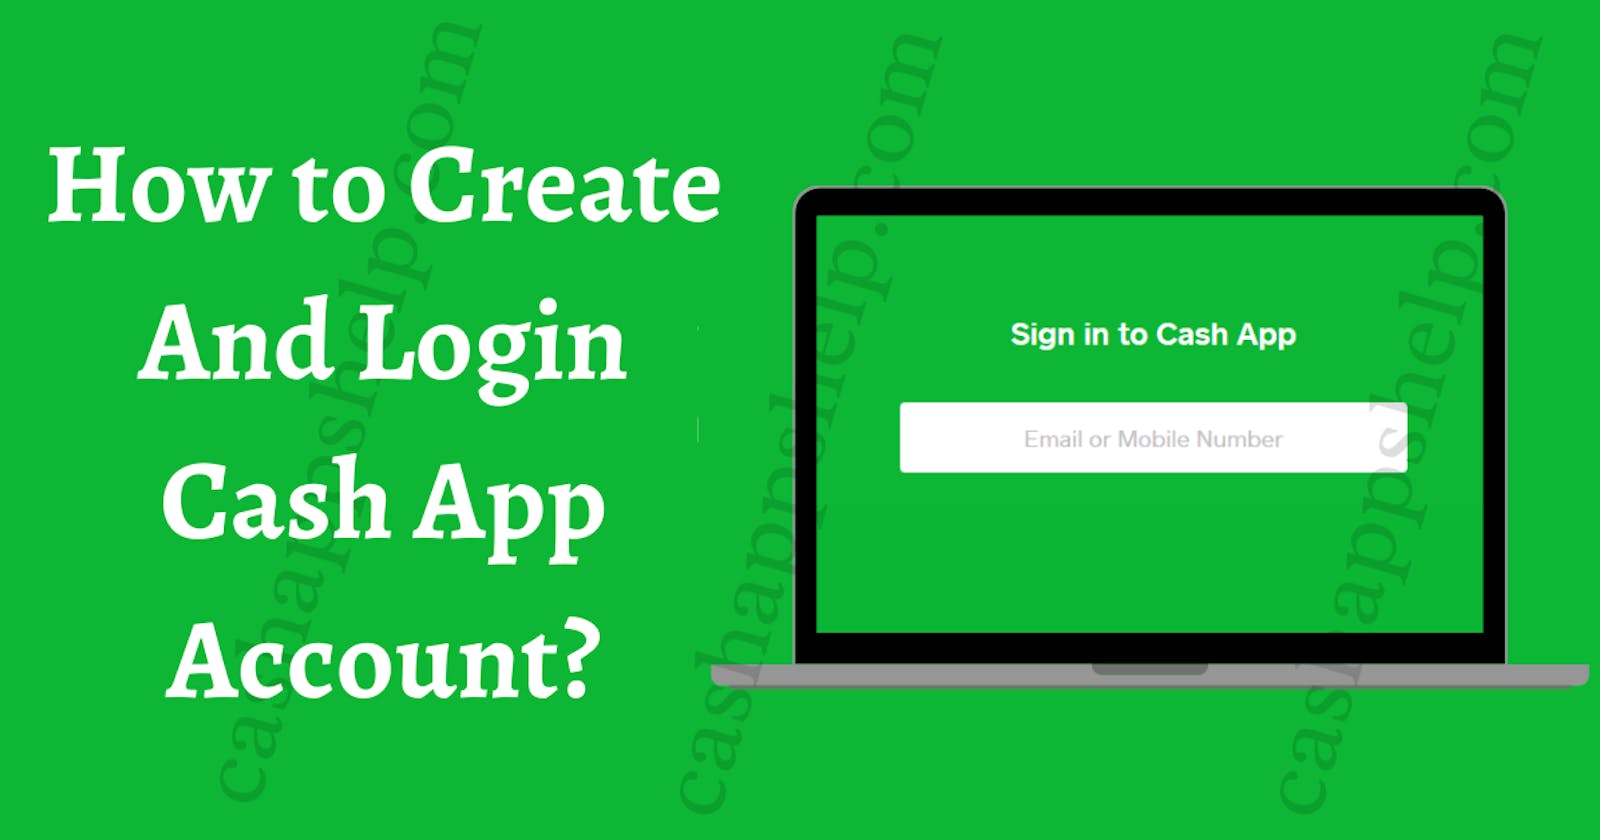 Cash App Login- How to Sign in to Cash App on Your device?